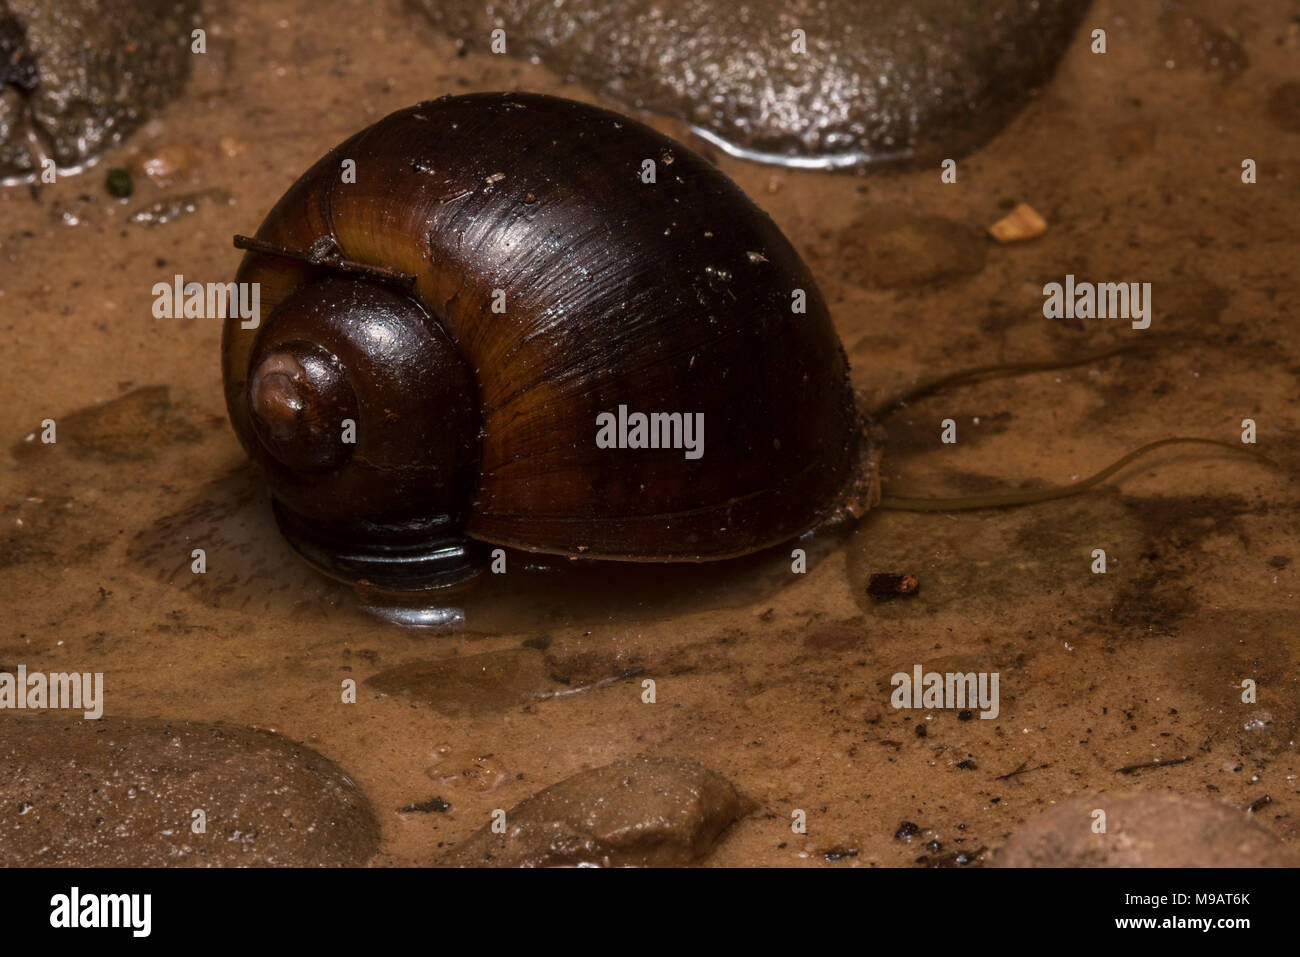 An apple snail from Peru, some of the species in this group have become invasive pests in certain parts of the world like Florida and Hawaii. Stock Photo